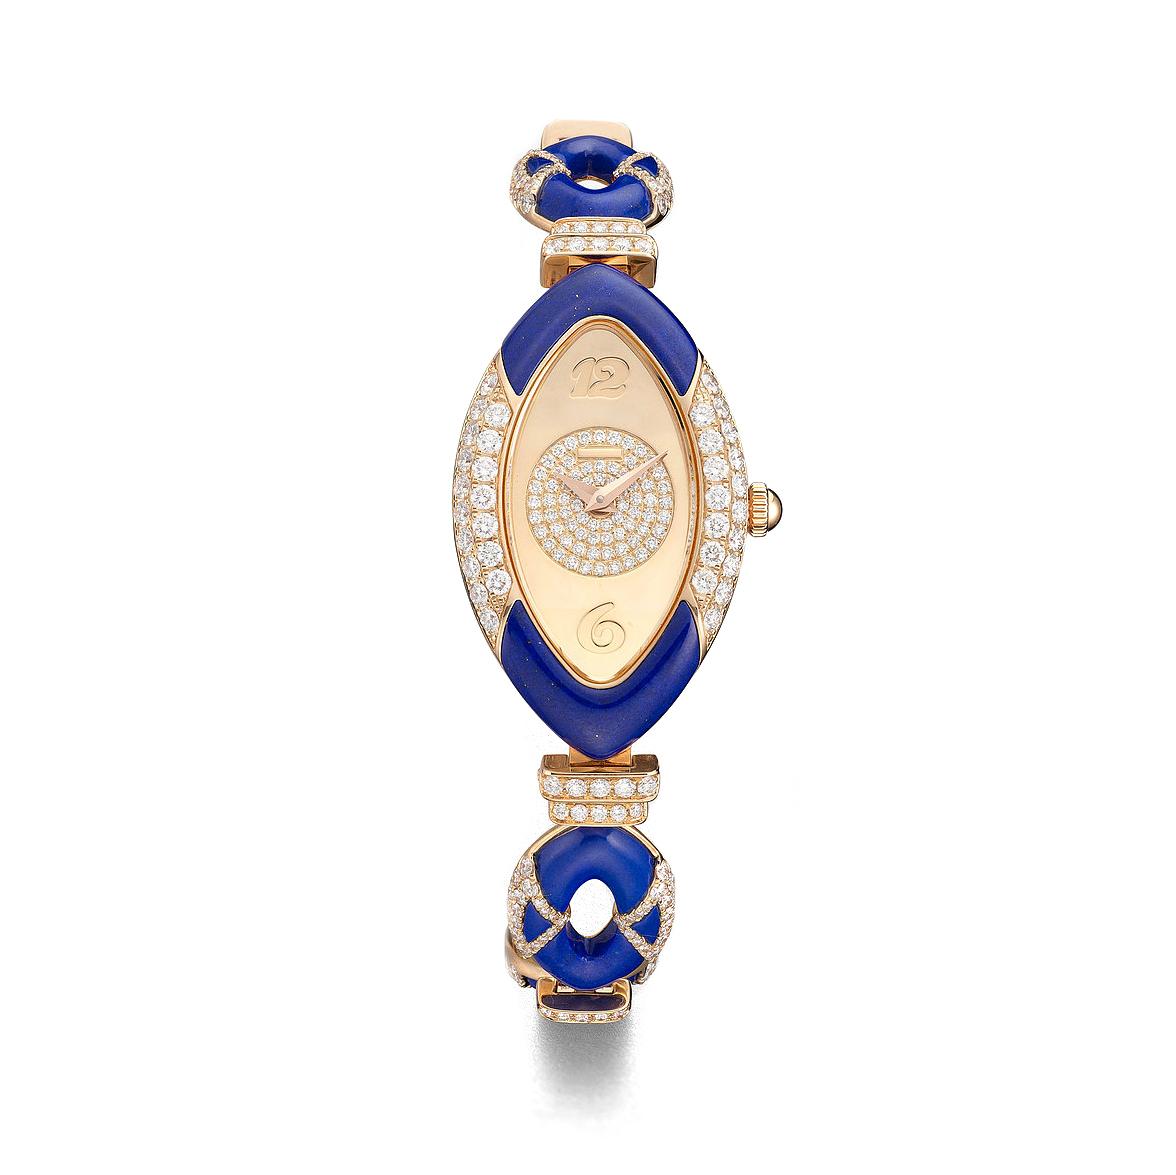 Watch in pink gold 18kt set with 26 lapis lazuli 19.48 cts, case dial and bracelet set with 393 diamonds 3.41 cts quartz movement.

We do not guarantee the functioning of this watch.